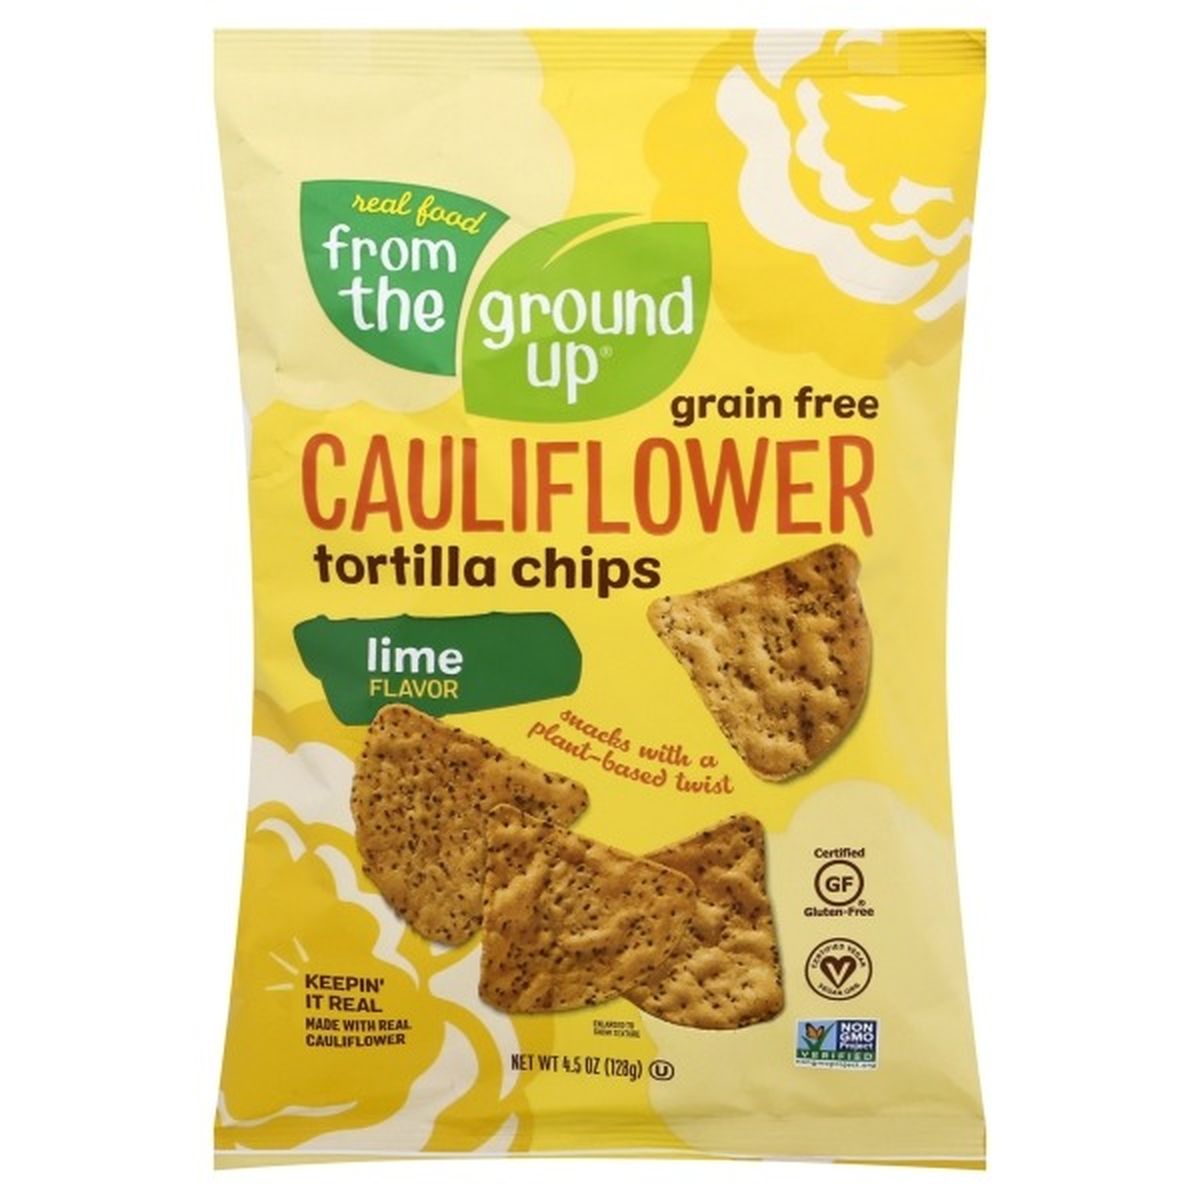 Calories in From the Ground Up Tortilla Chips, Cauliflower, Grain Free, Lime Flavor